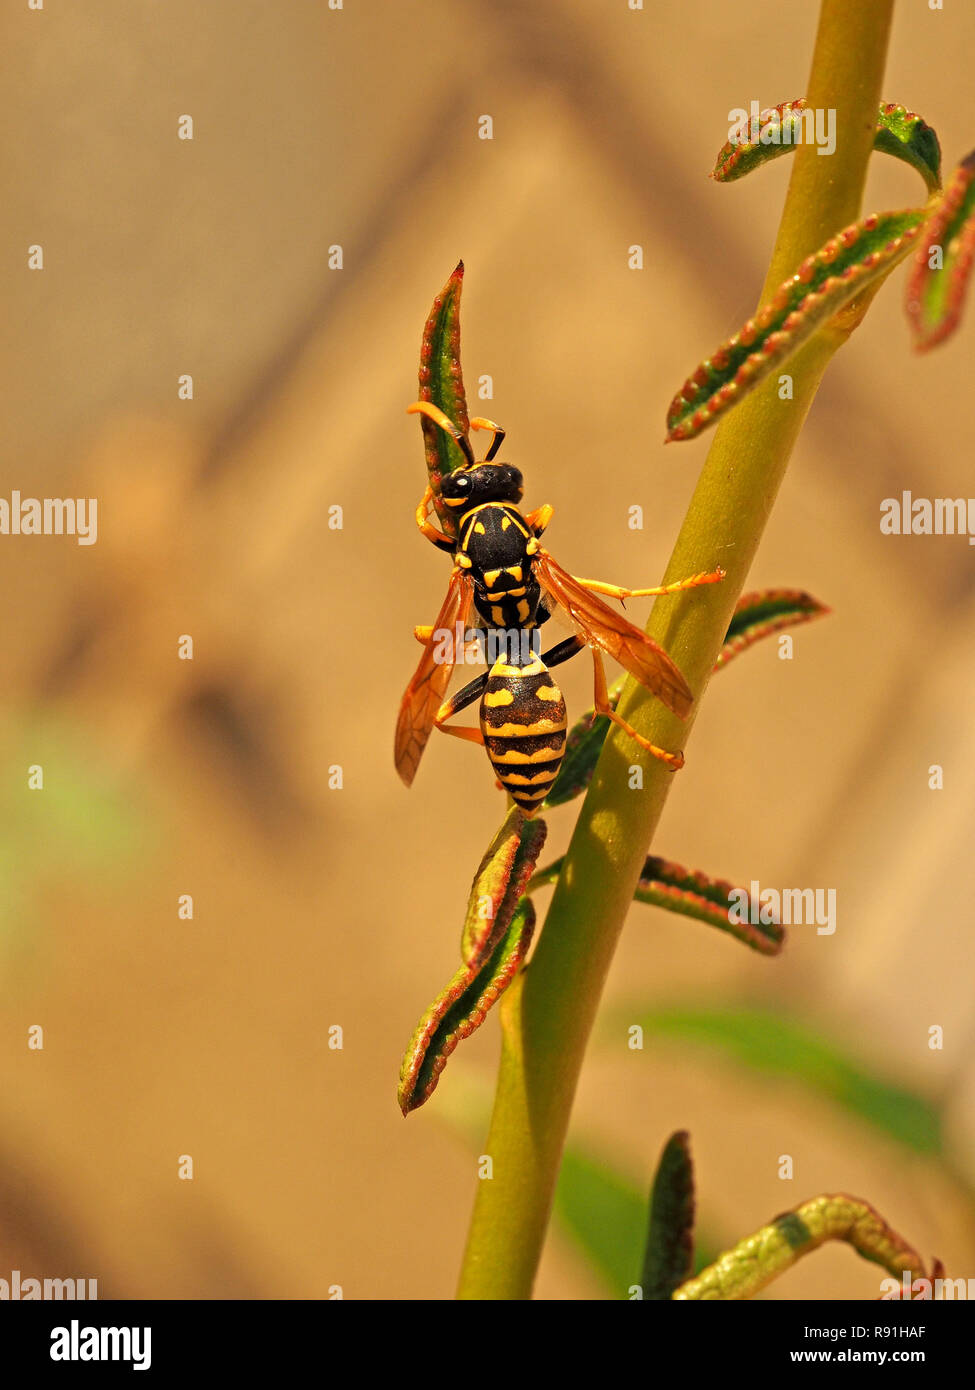 female European paper wasp (Polistes dominula), tending fresh new leaves of rose plant near to chambered paper nest in Tuscany Italy Stock Photo